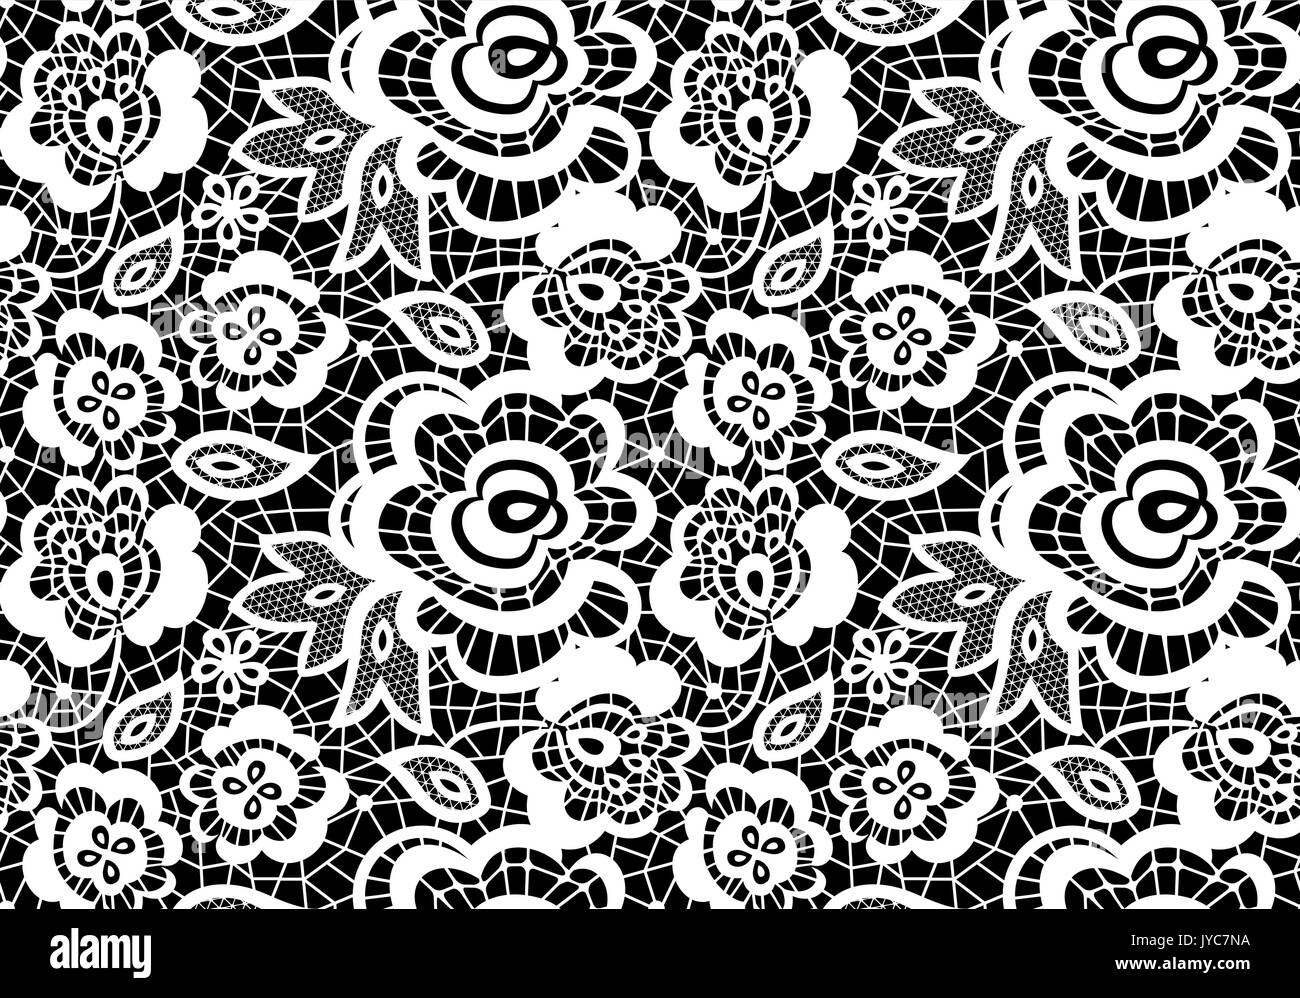 vintage lace guipure seamless pattern with abstract flowers on black background Stock Vector